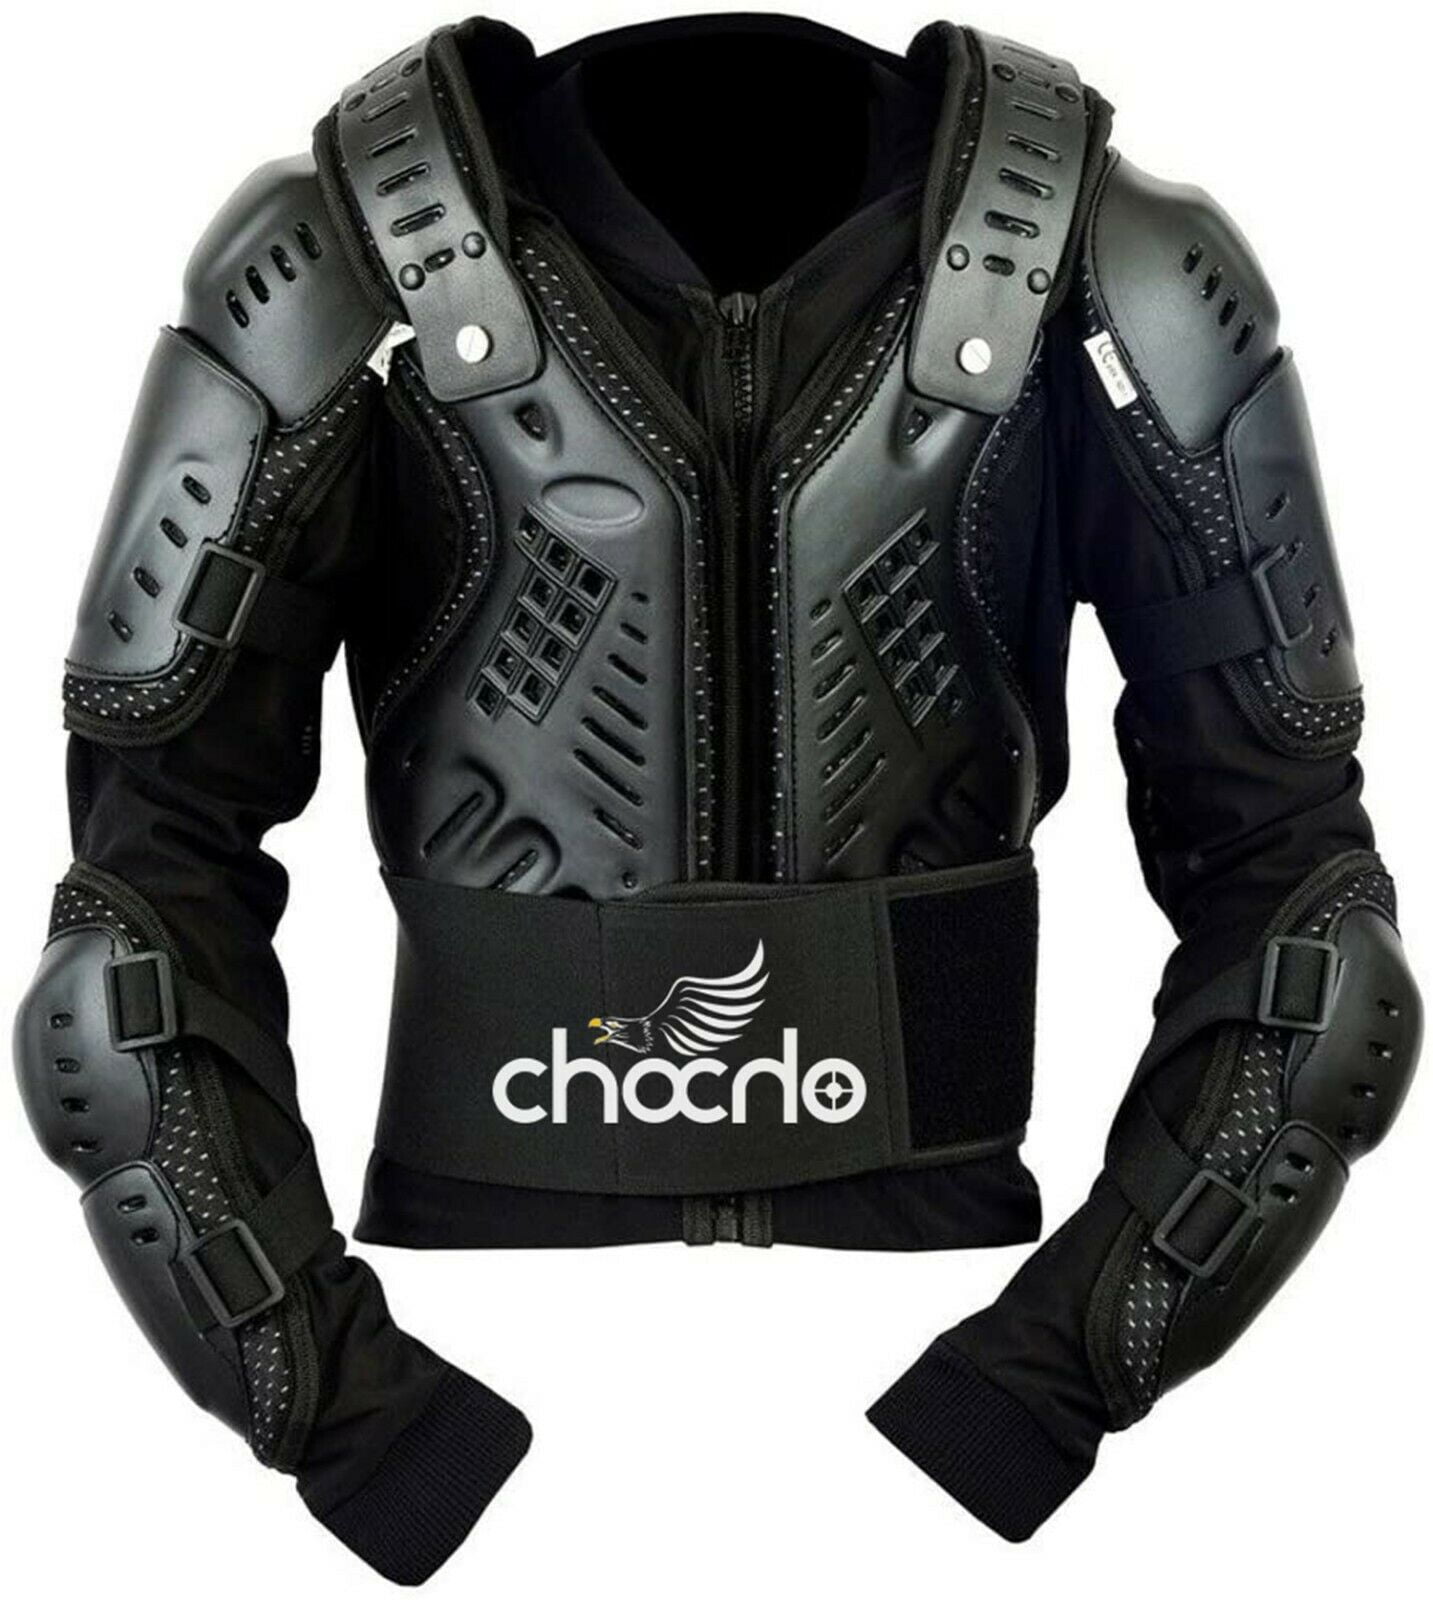 BODY ARMOUR CE MOTORBIKE/MOTORCYCLE/MOTOCROSS SKIING SKATING SNOW BOARD IMPACT PADDED SPINE GUARD PROTECTIVE SUIT XS